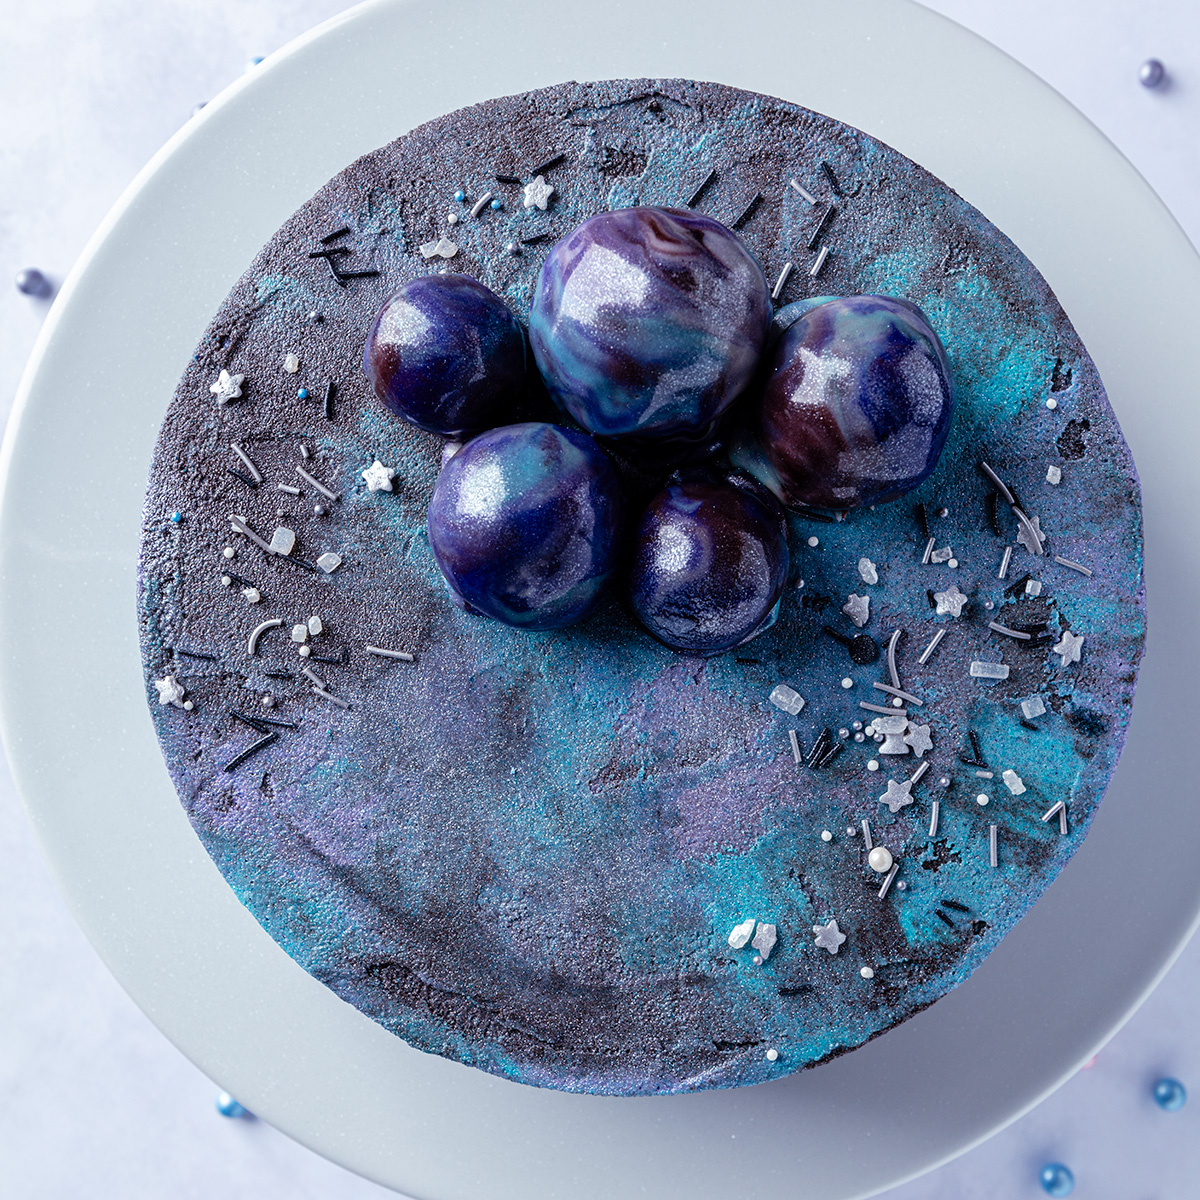 vegan chocolate cake with galaxy buttercream frosting and planets on top